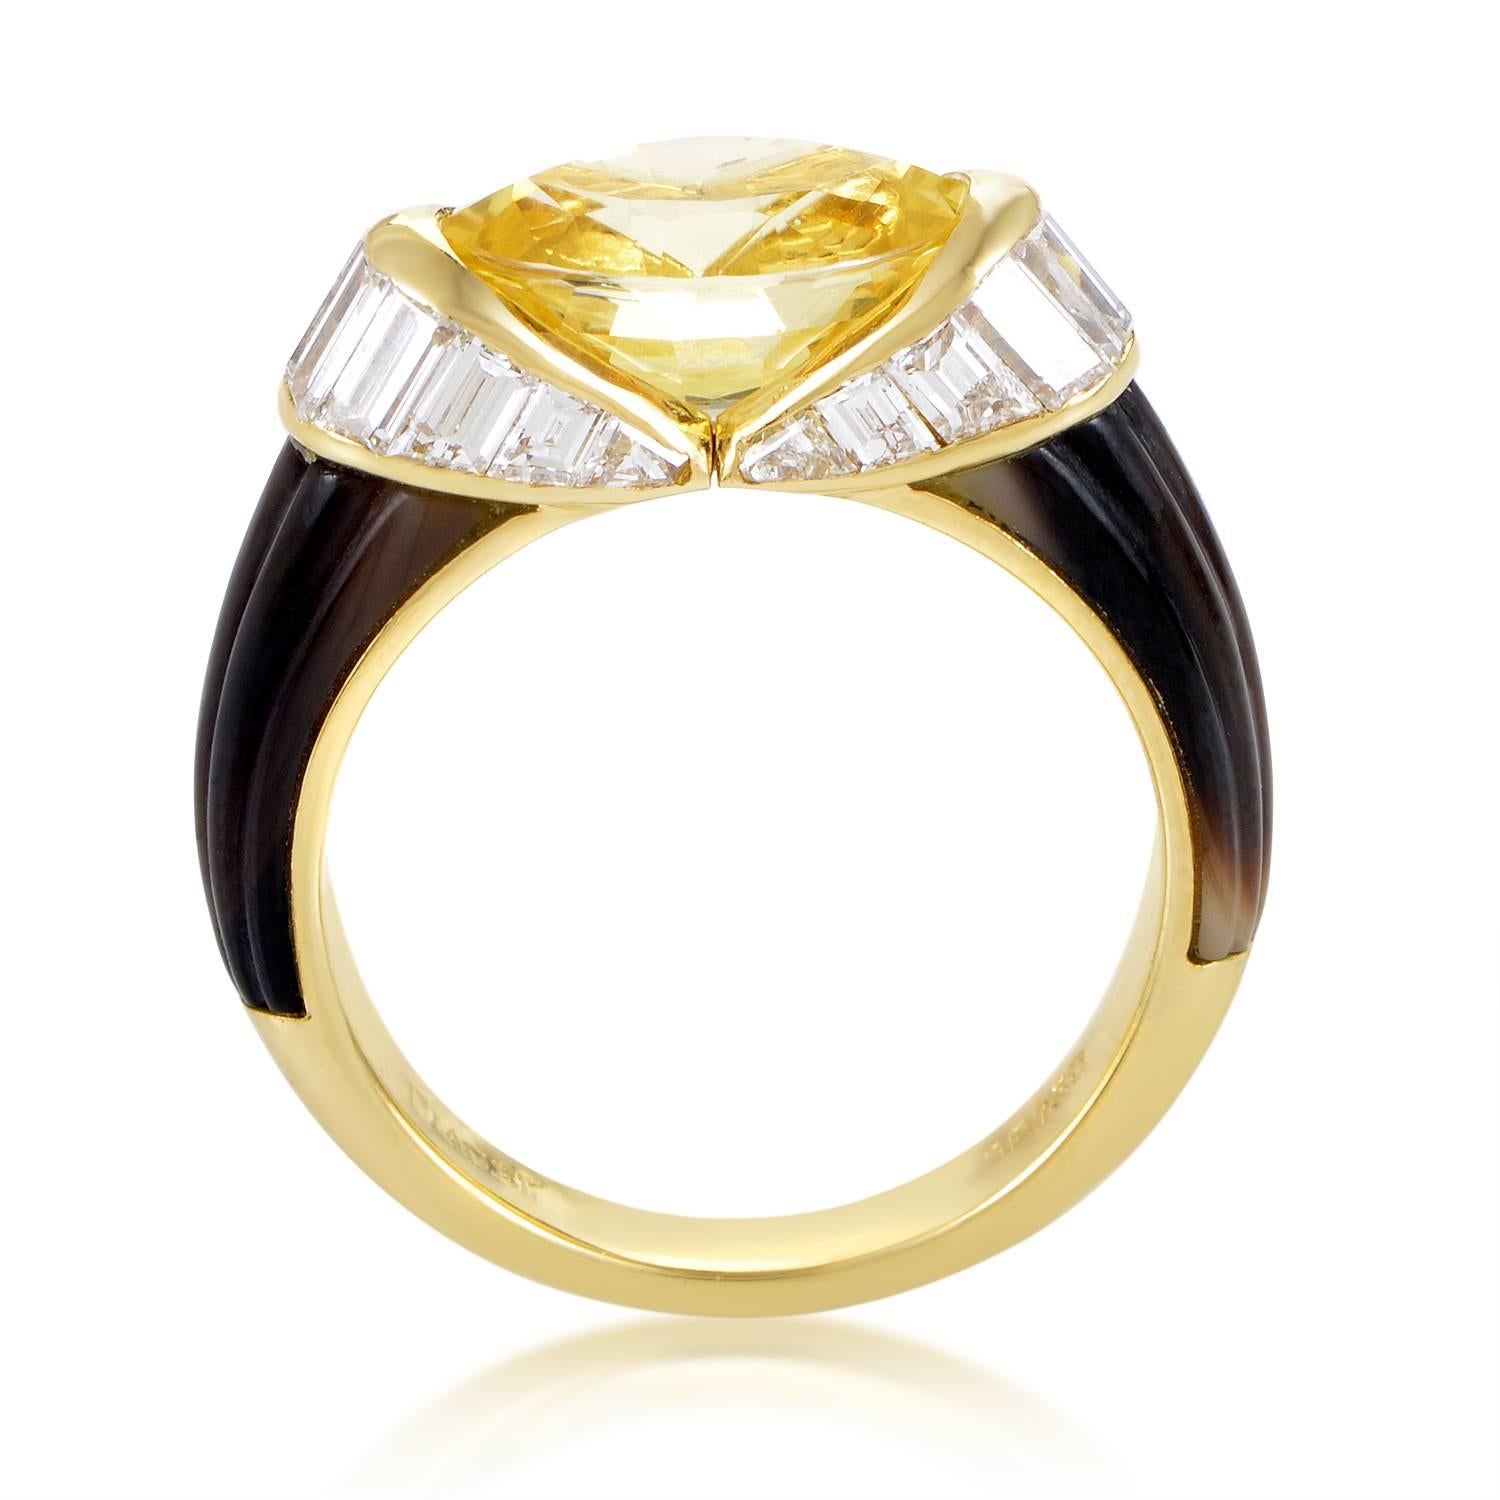 This gorgeous ring from Piaget is without comparison! The ring is made of 18K yellow gold and boasts shanks accented with mother of pearl. Lastly, a 1.25ct diamond baguette 